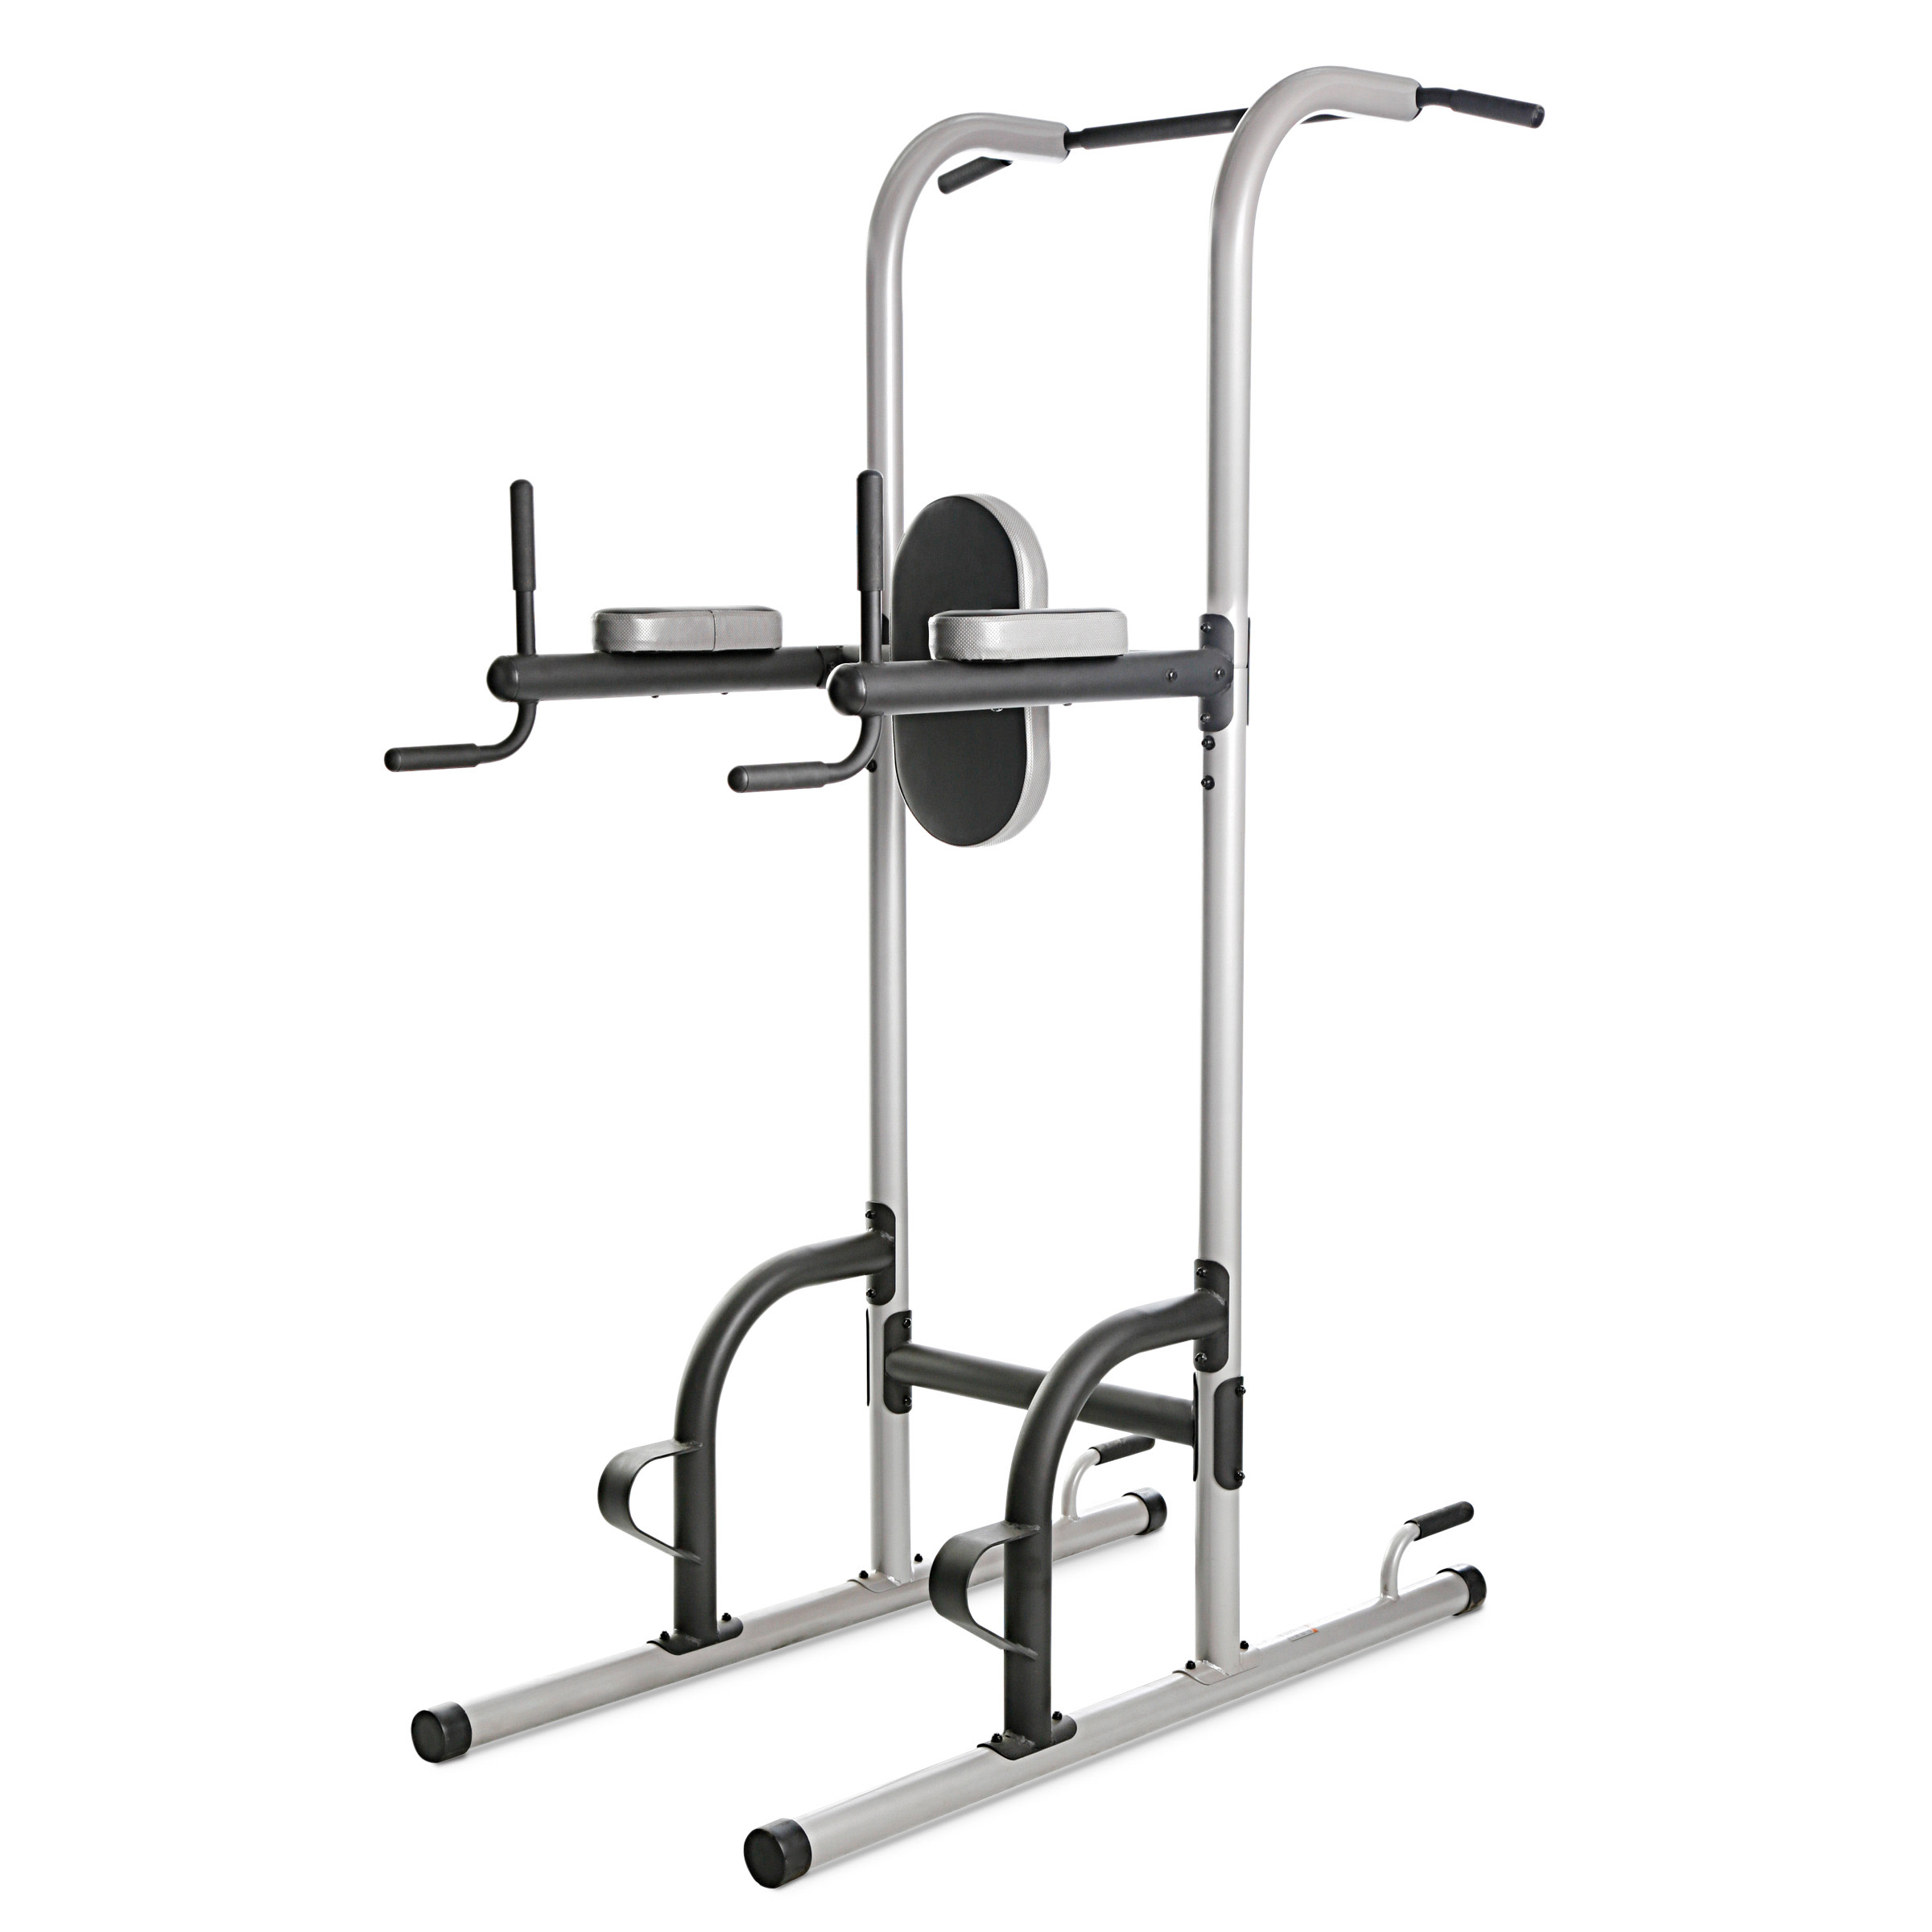 ProForm XR 10.9 Power Tower with Push-Up, Pull-Up & Dip Stations, 300 Lb. Weight Limit - image 1 of 9